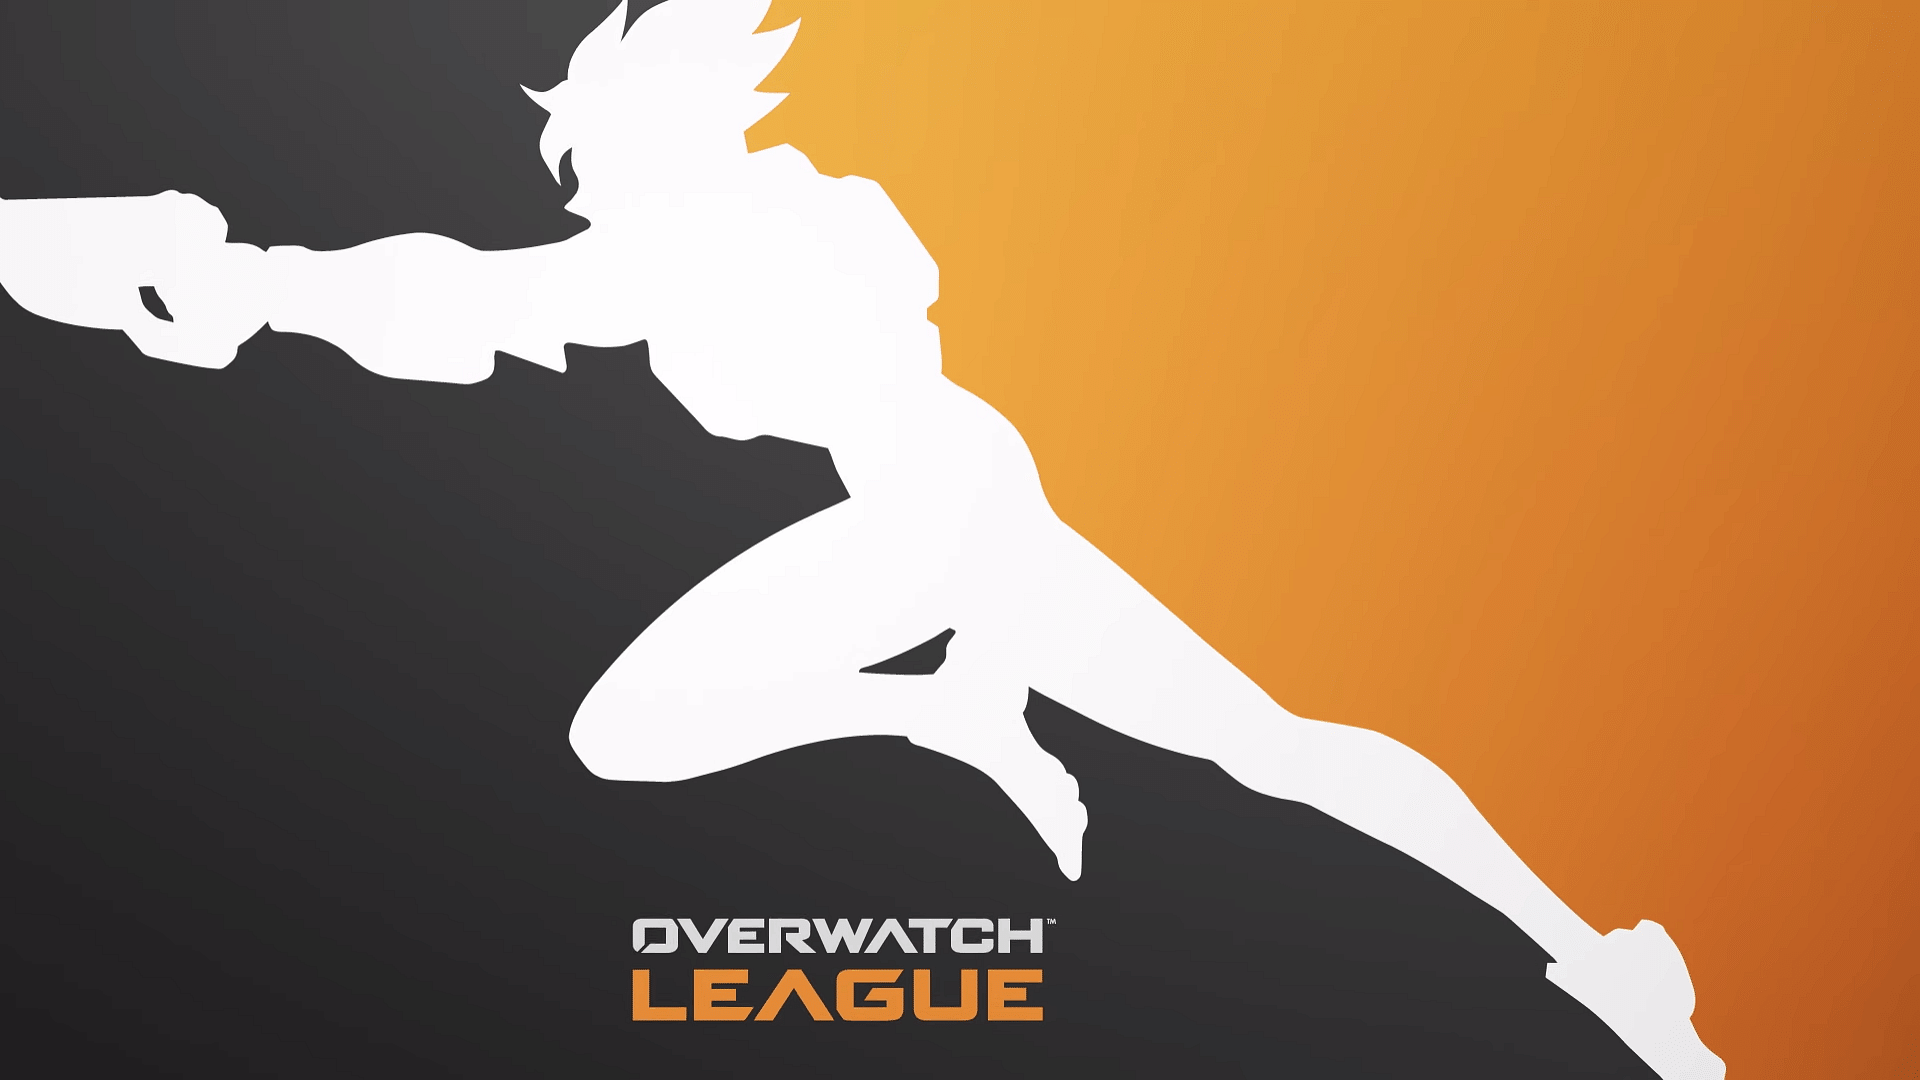 An image showing Tracer in negative space and making the logo of Overwatch League